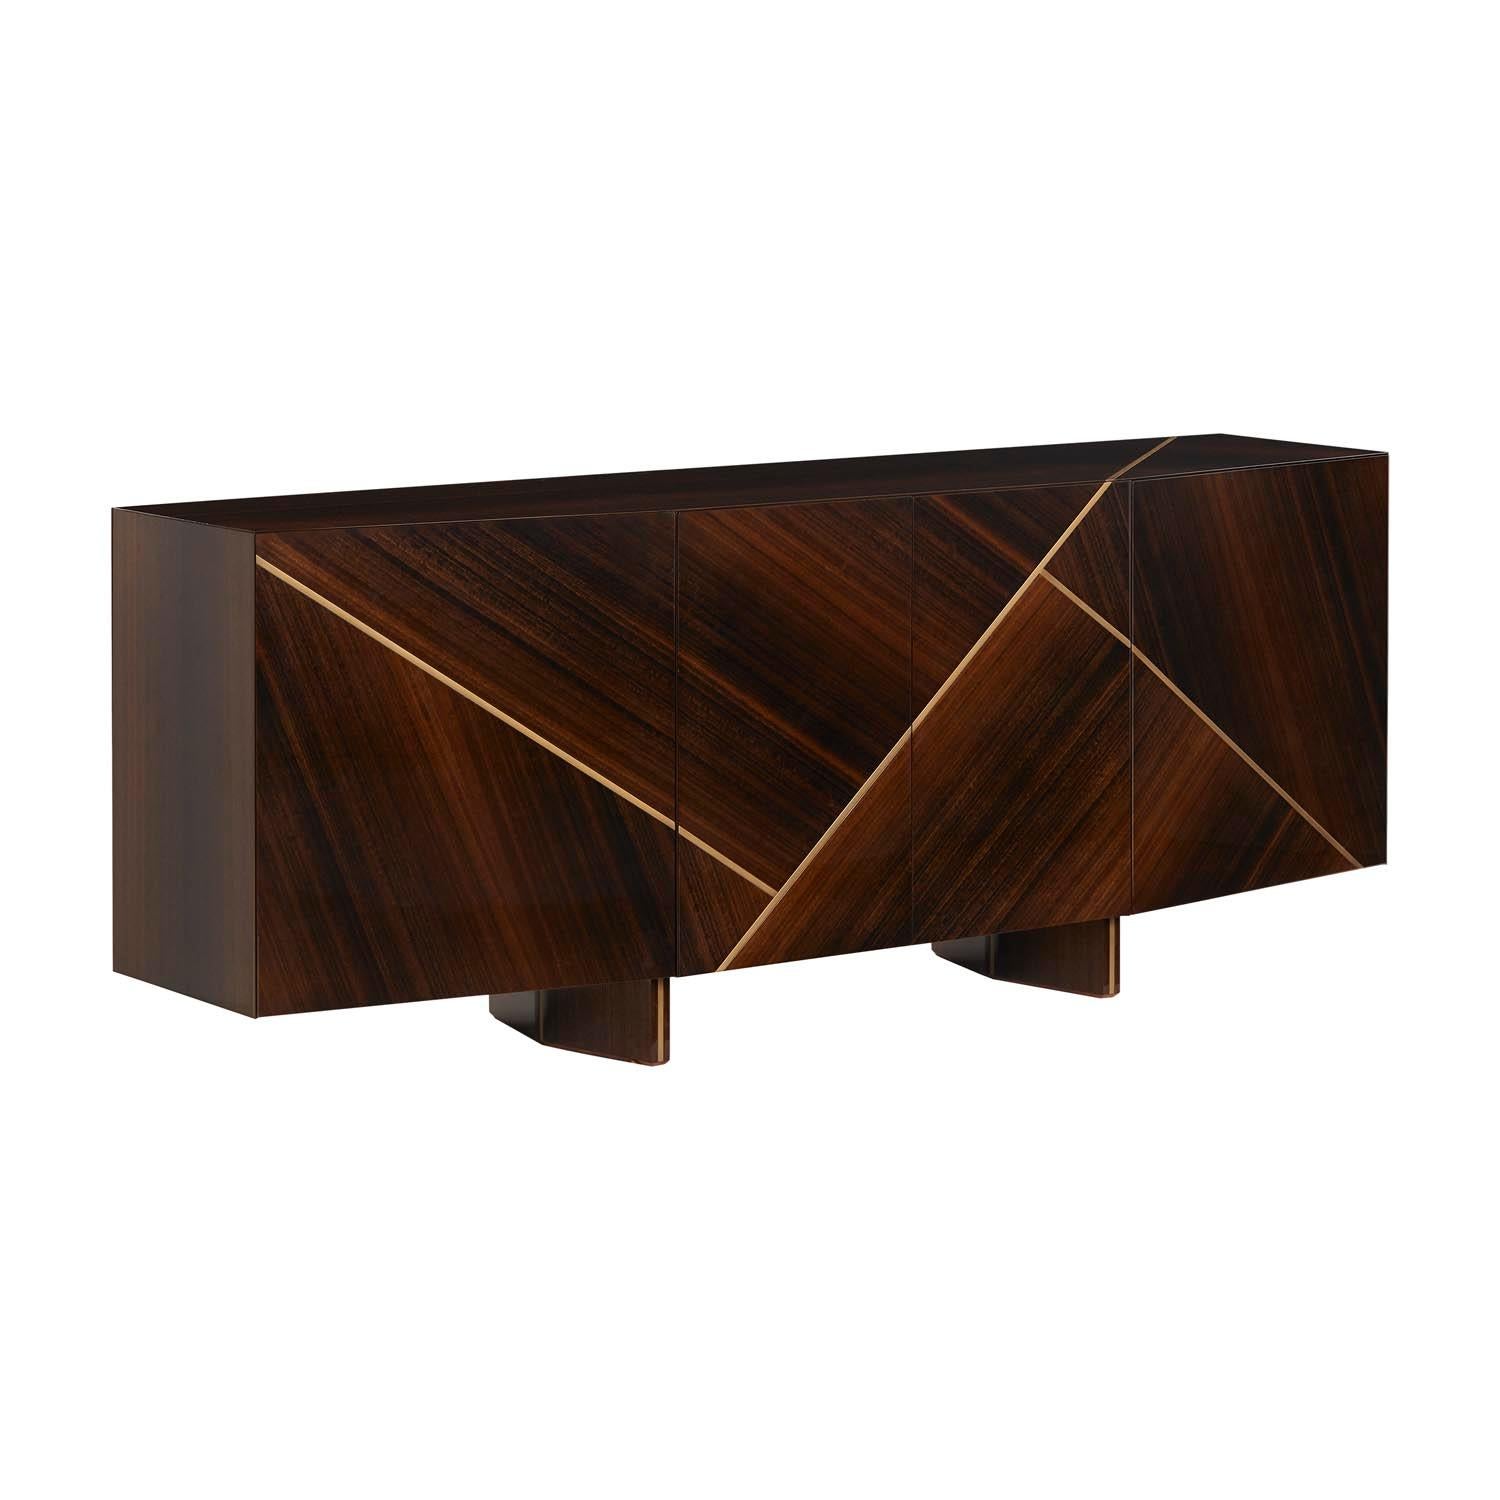 Lorca sideboard is a bold design piece that brings elegance and sobriety to any modern room project. Inlaid details in antique brass color or stainless steel.
 Available in any lacquer or veneered wood on request.

Shown in glossy Eucalyptus Fumé